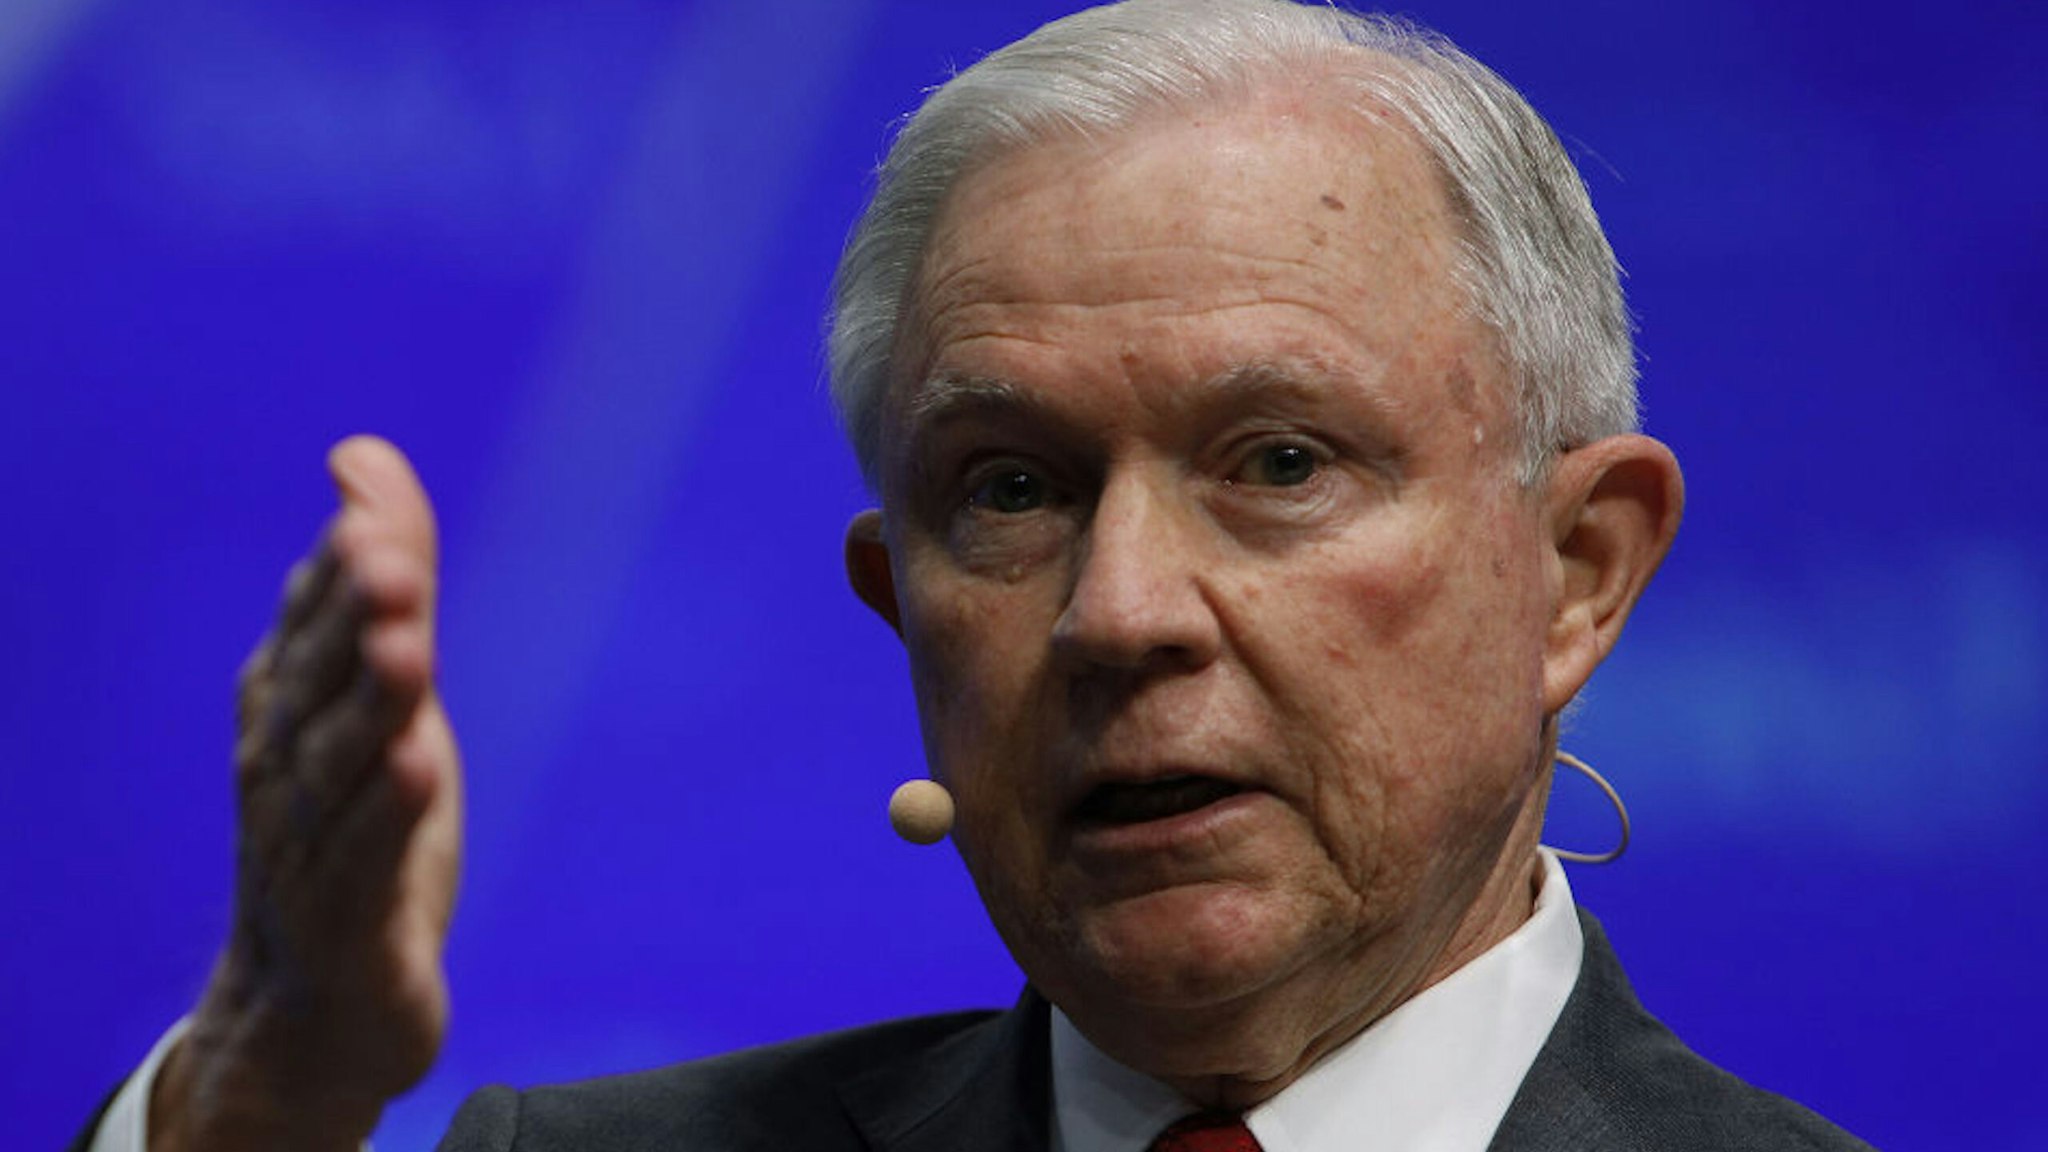 Jeff Sessions, U.S. attorney general, speaks during the Skybridge Alternatives (SALT) conference in Las Vegas, Nevada, U.S., on Wednesday, May 8, 2019. SALT brings together investors, policy experts, politicians and business leaders to network and share ideas to unlock growth opportunities in finance, economics, entrepreneurship, public policy, technology and philanthropy.